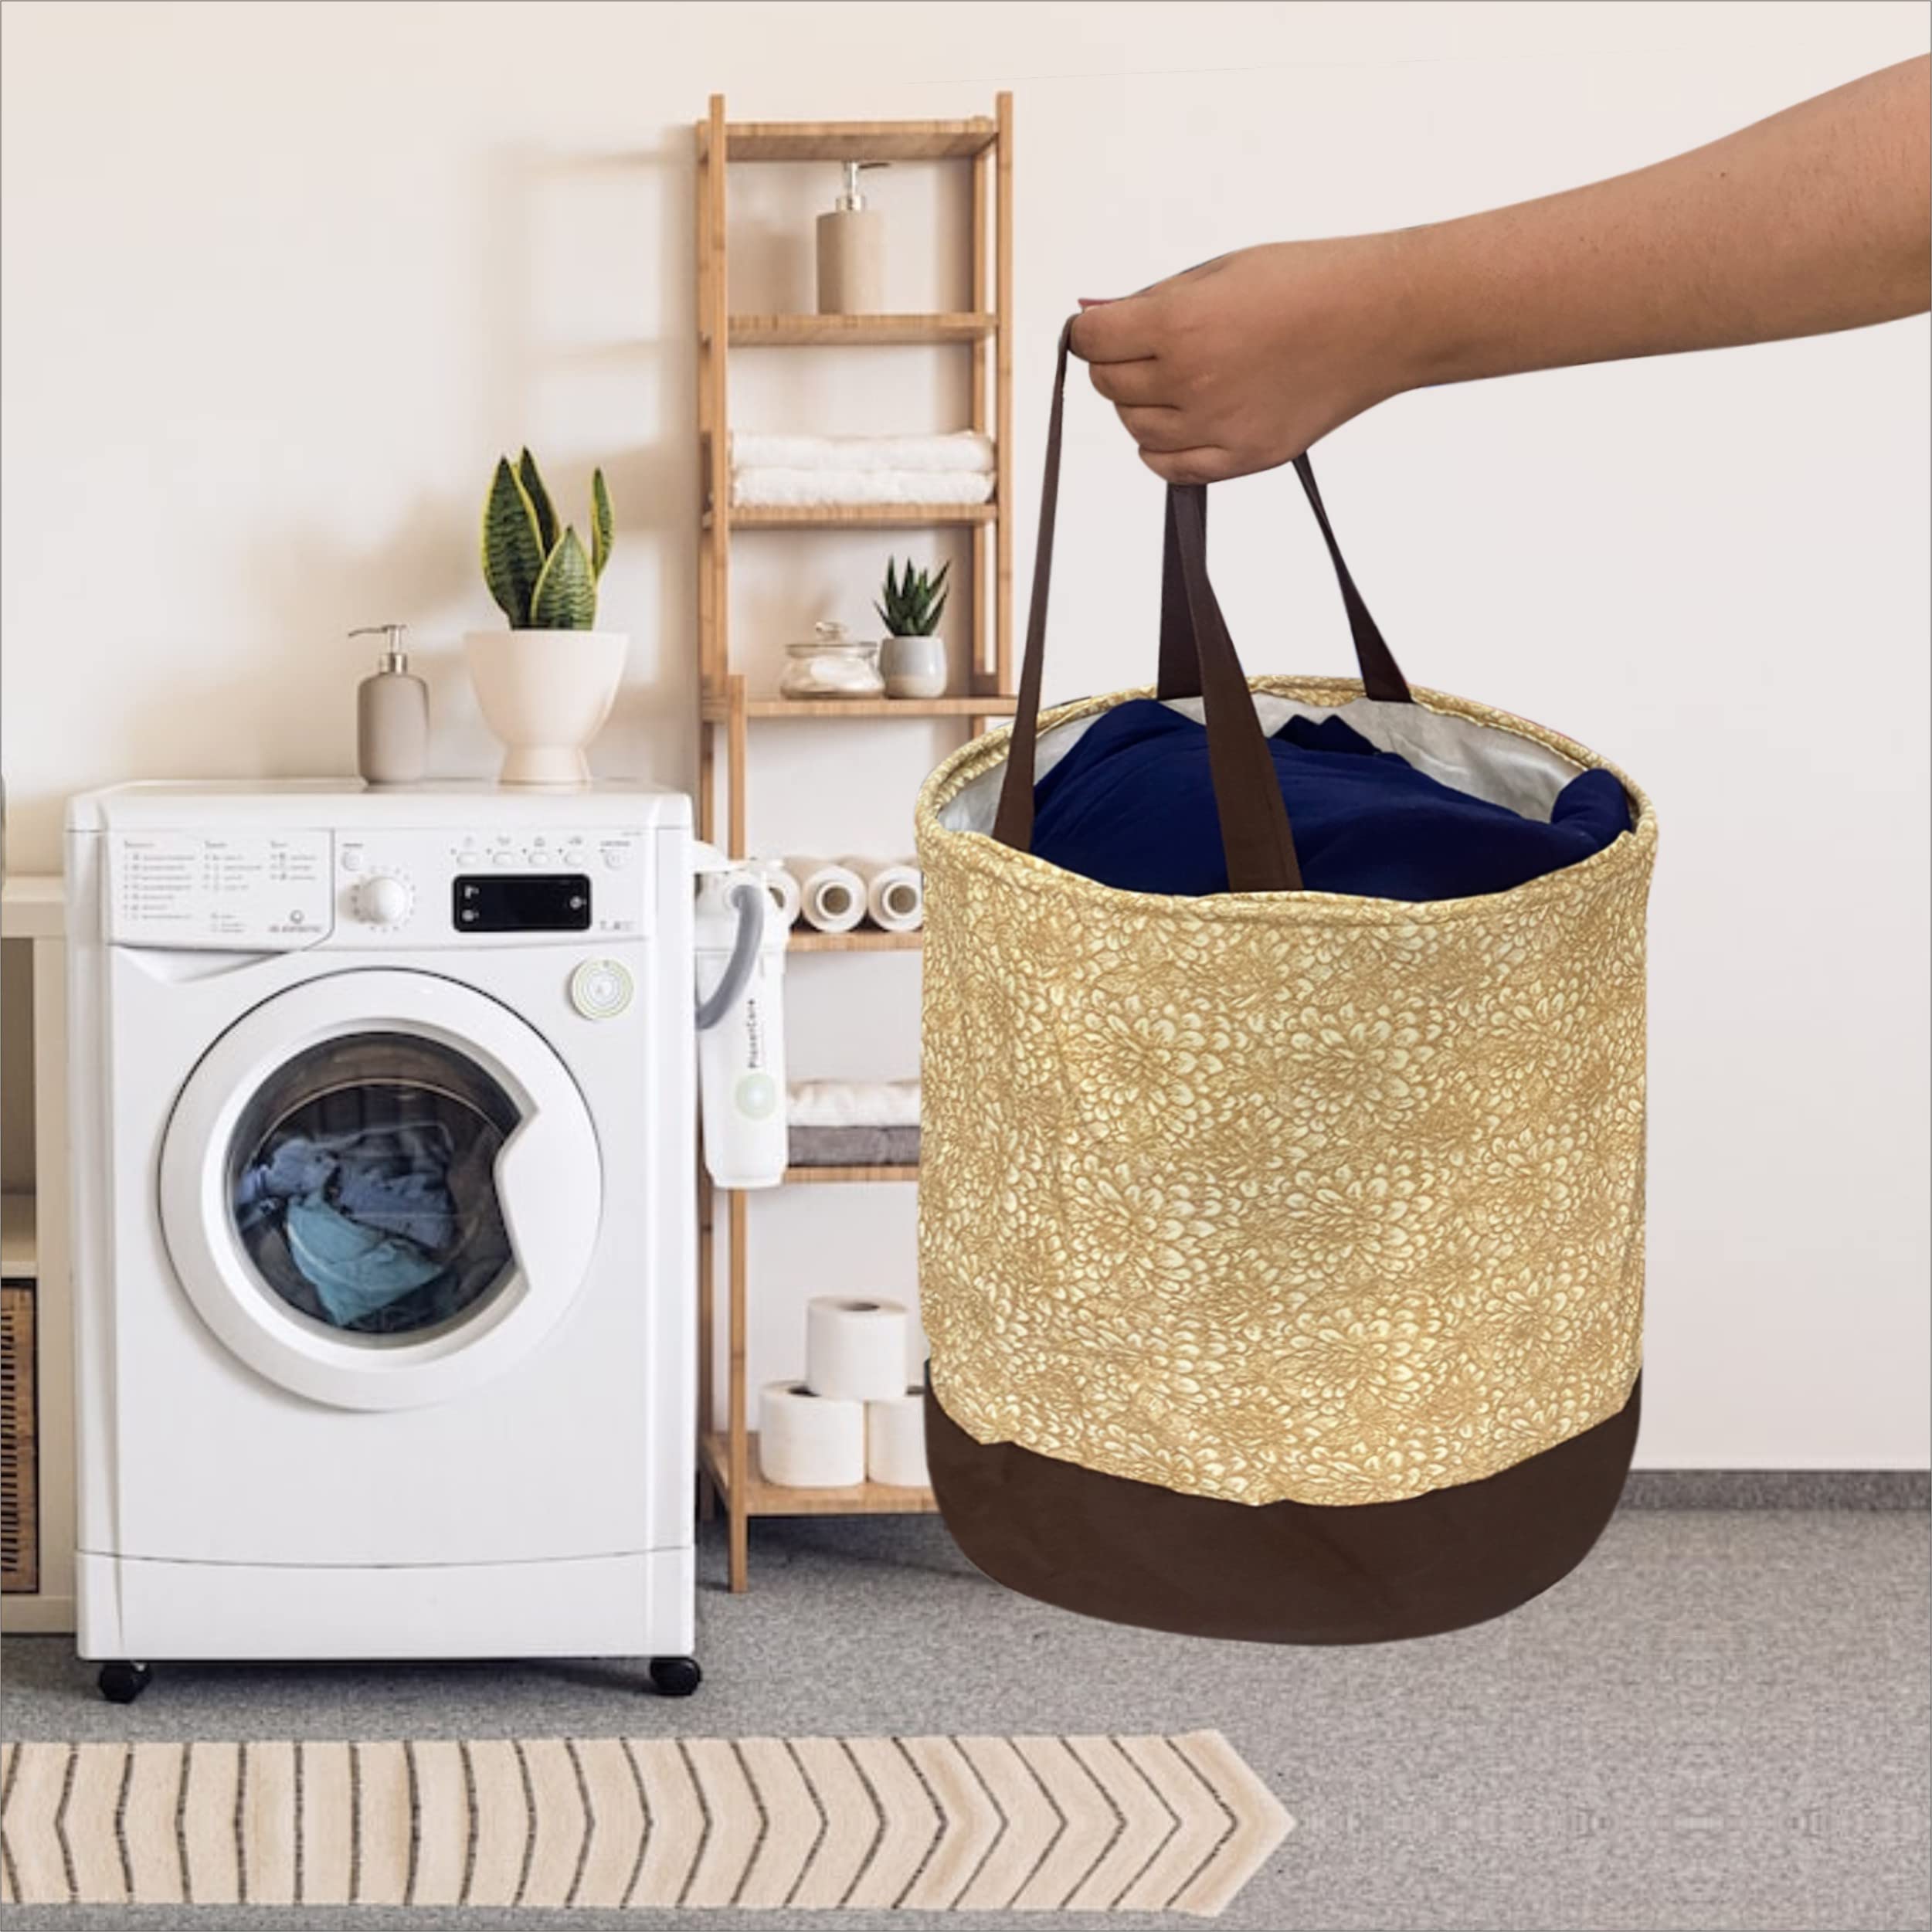 Homestic Canvas Waterproof Round Laundry Basket For clothes|Foldable Toy Storage Organizer|Reinforced Handle With Sturdy Base|BROWN|